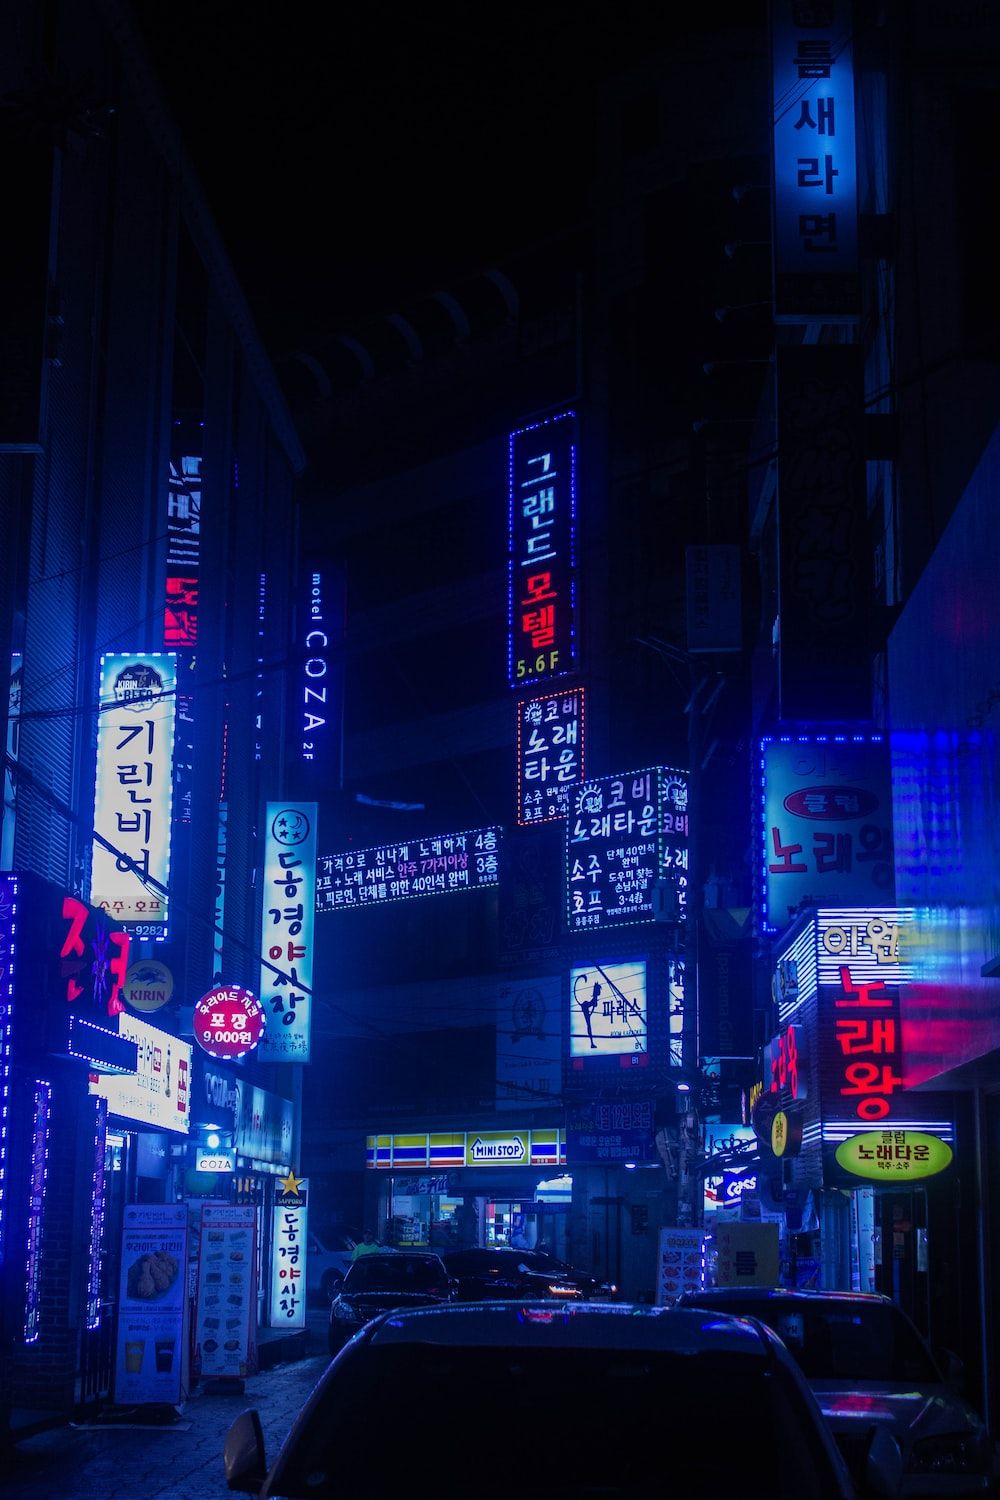 A city street at night with bright blue and purple neon lights - Neon blue, neon, Cyberpunk